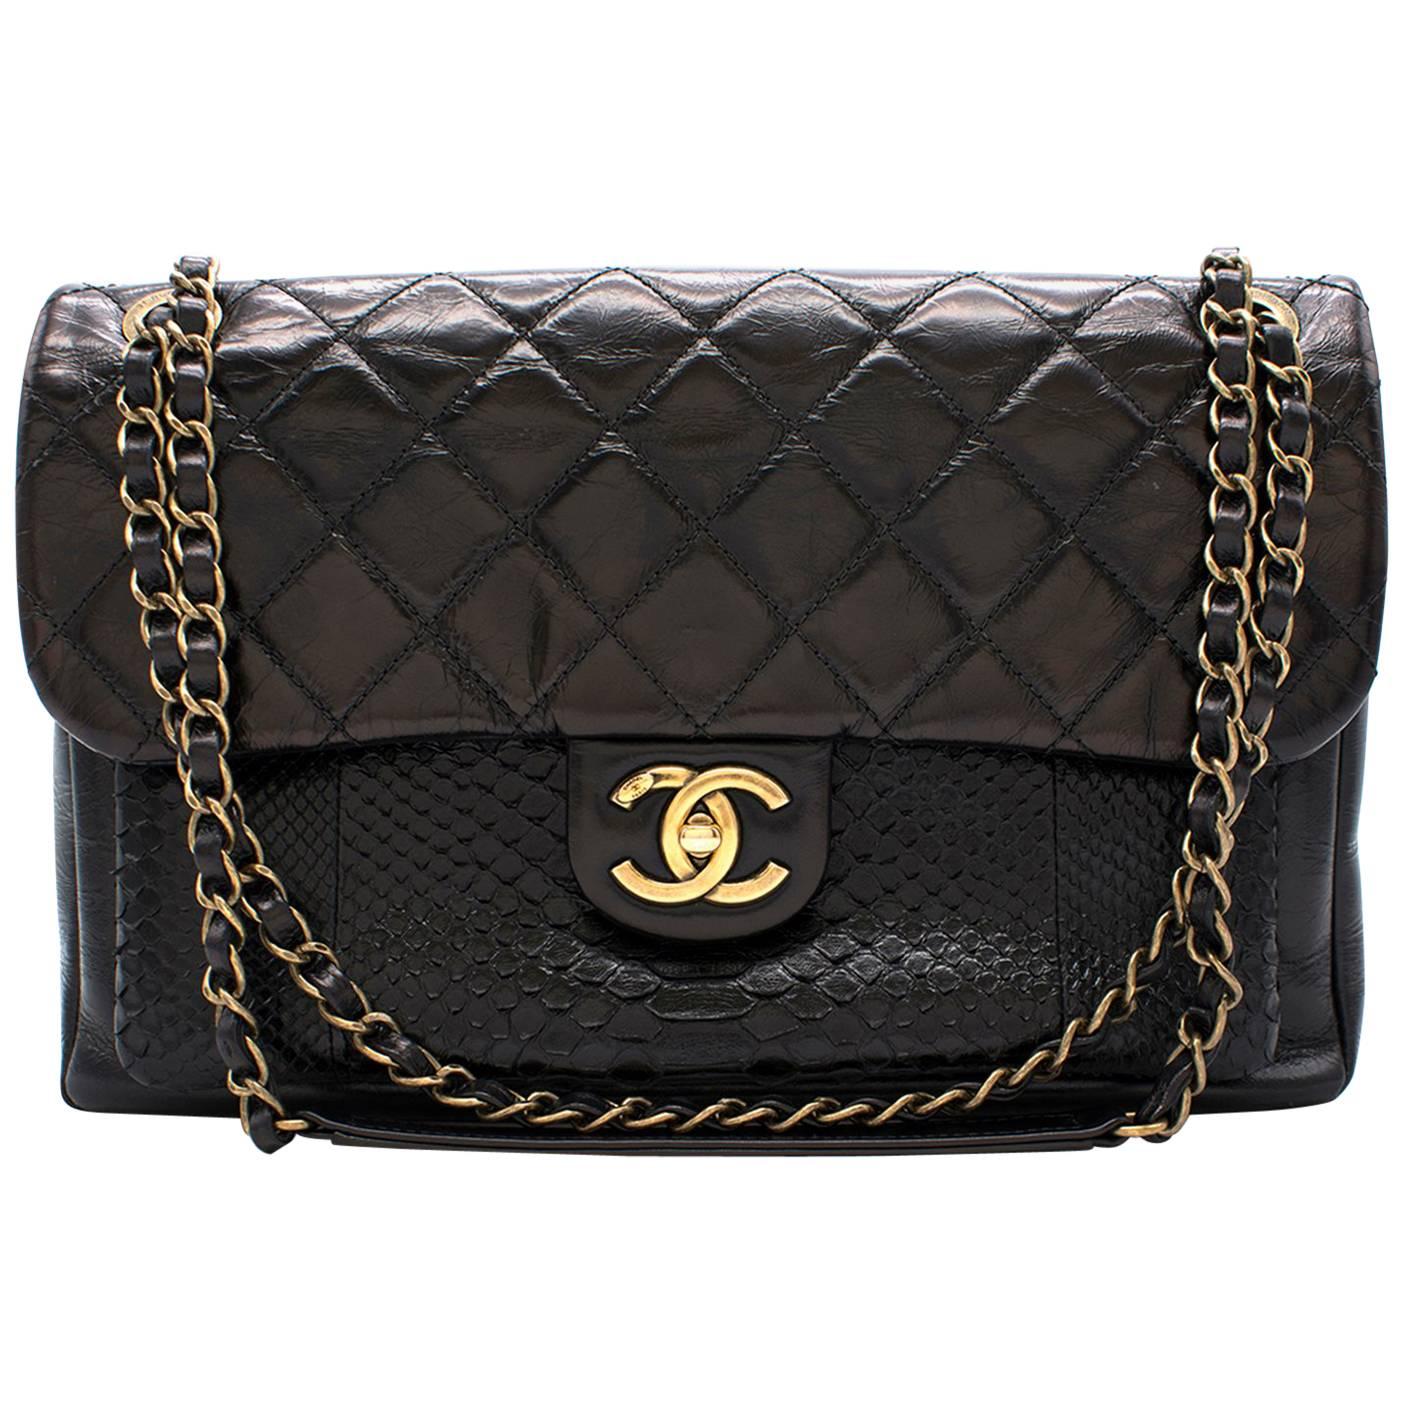 Chanel Black Classic Flap Bag with Snakeskin Exterior Pocket For Sale